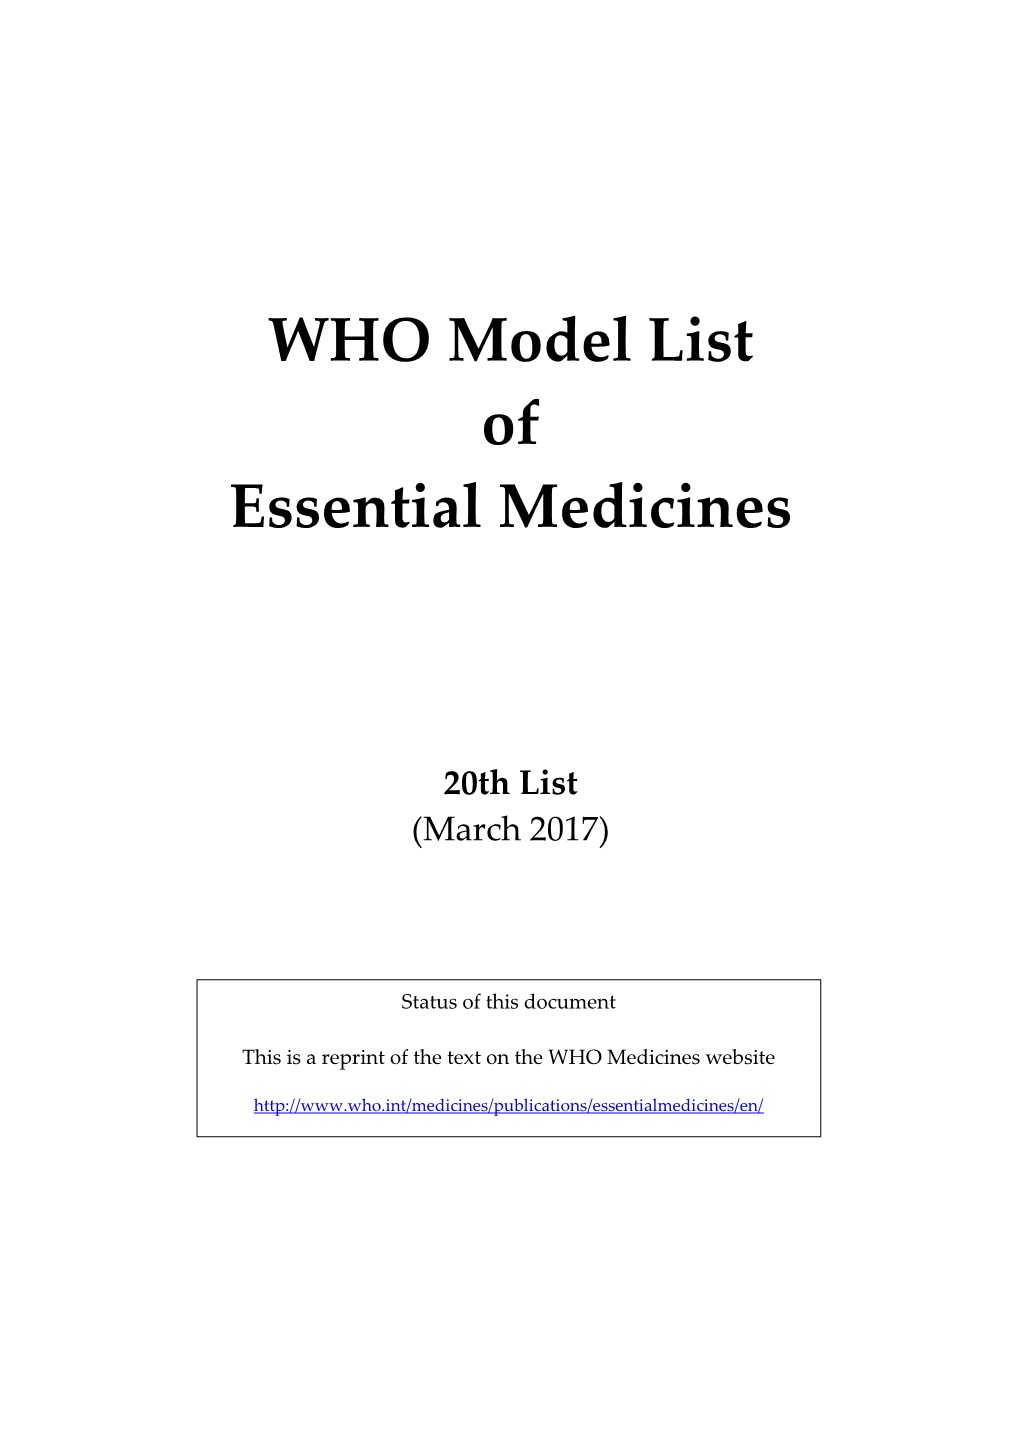 WHO Model List of Essential Medicines for 2017